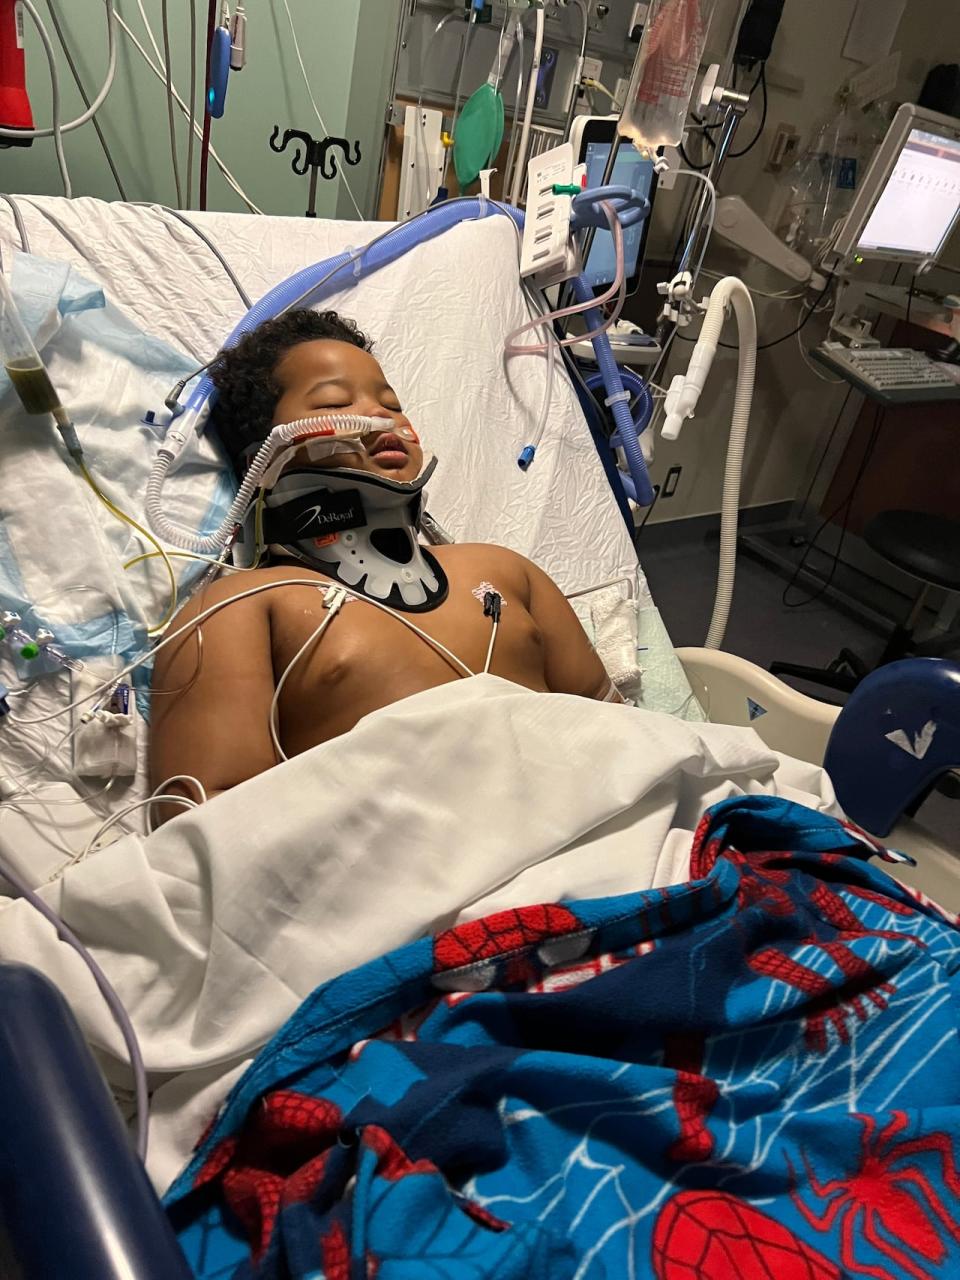 Hooked up to a breathing tube, Jayden Hunter, 7, has been unable to talk or move since he was taken to the hospital after the collision last week. (Submitted by Cora Hunter - image credit)